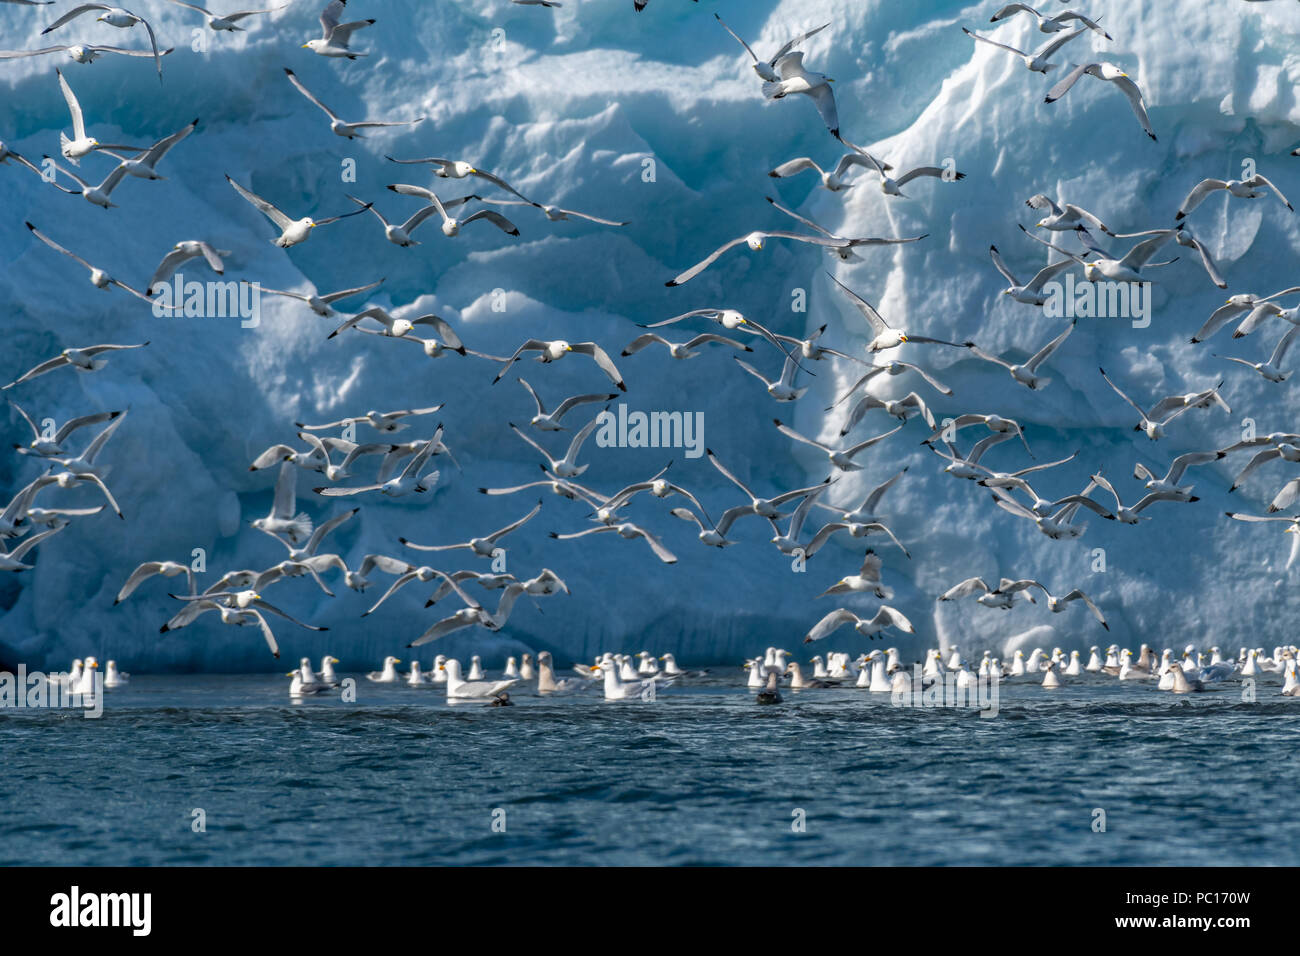 Large flock of Black-legged Kittiwakes (Rissa tridactyla) in flight in front of a glacier in Hornsund, Svalbard. Stock Photo